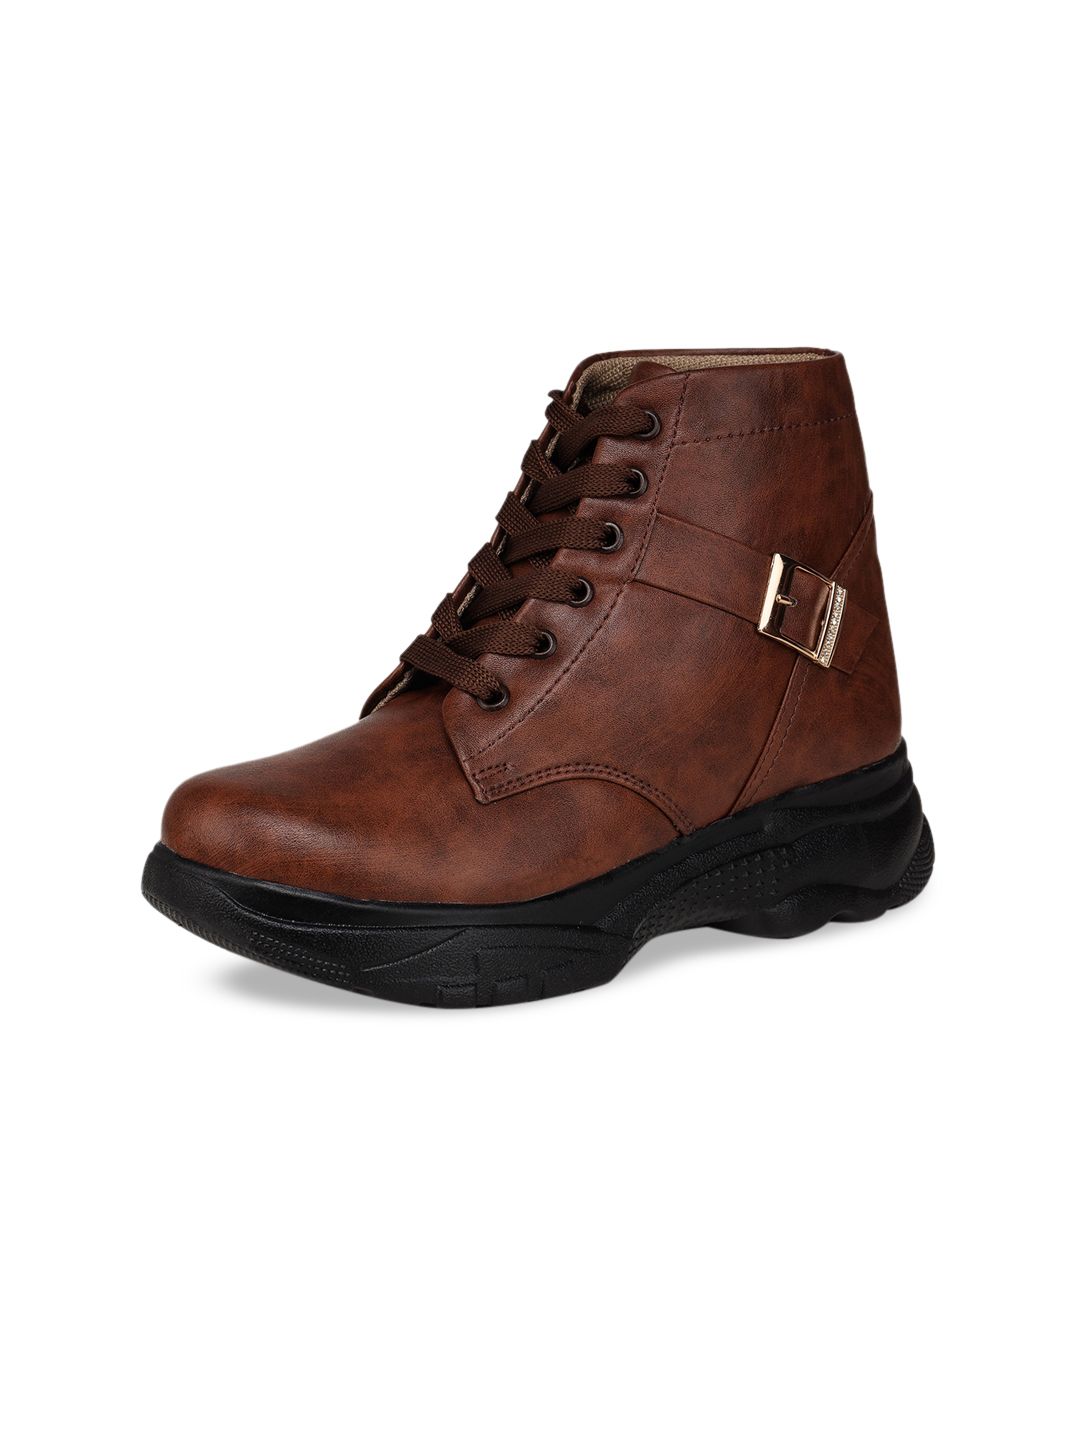 BOOTCO Women Brown High-Top Flat Boots Price in India